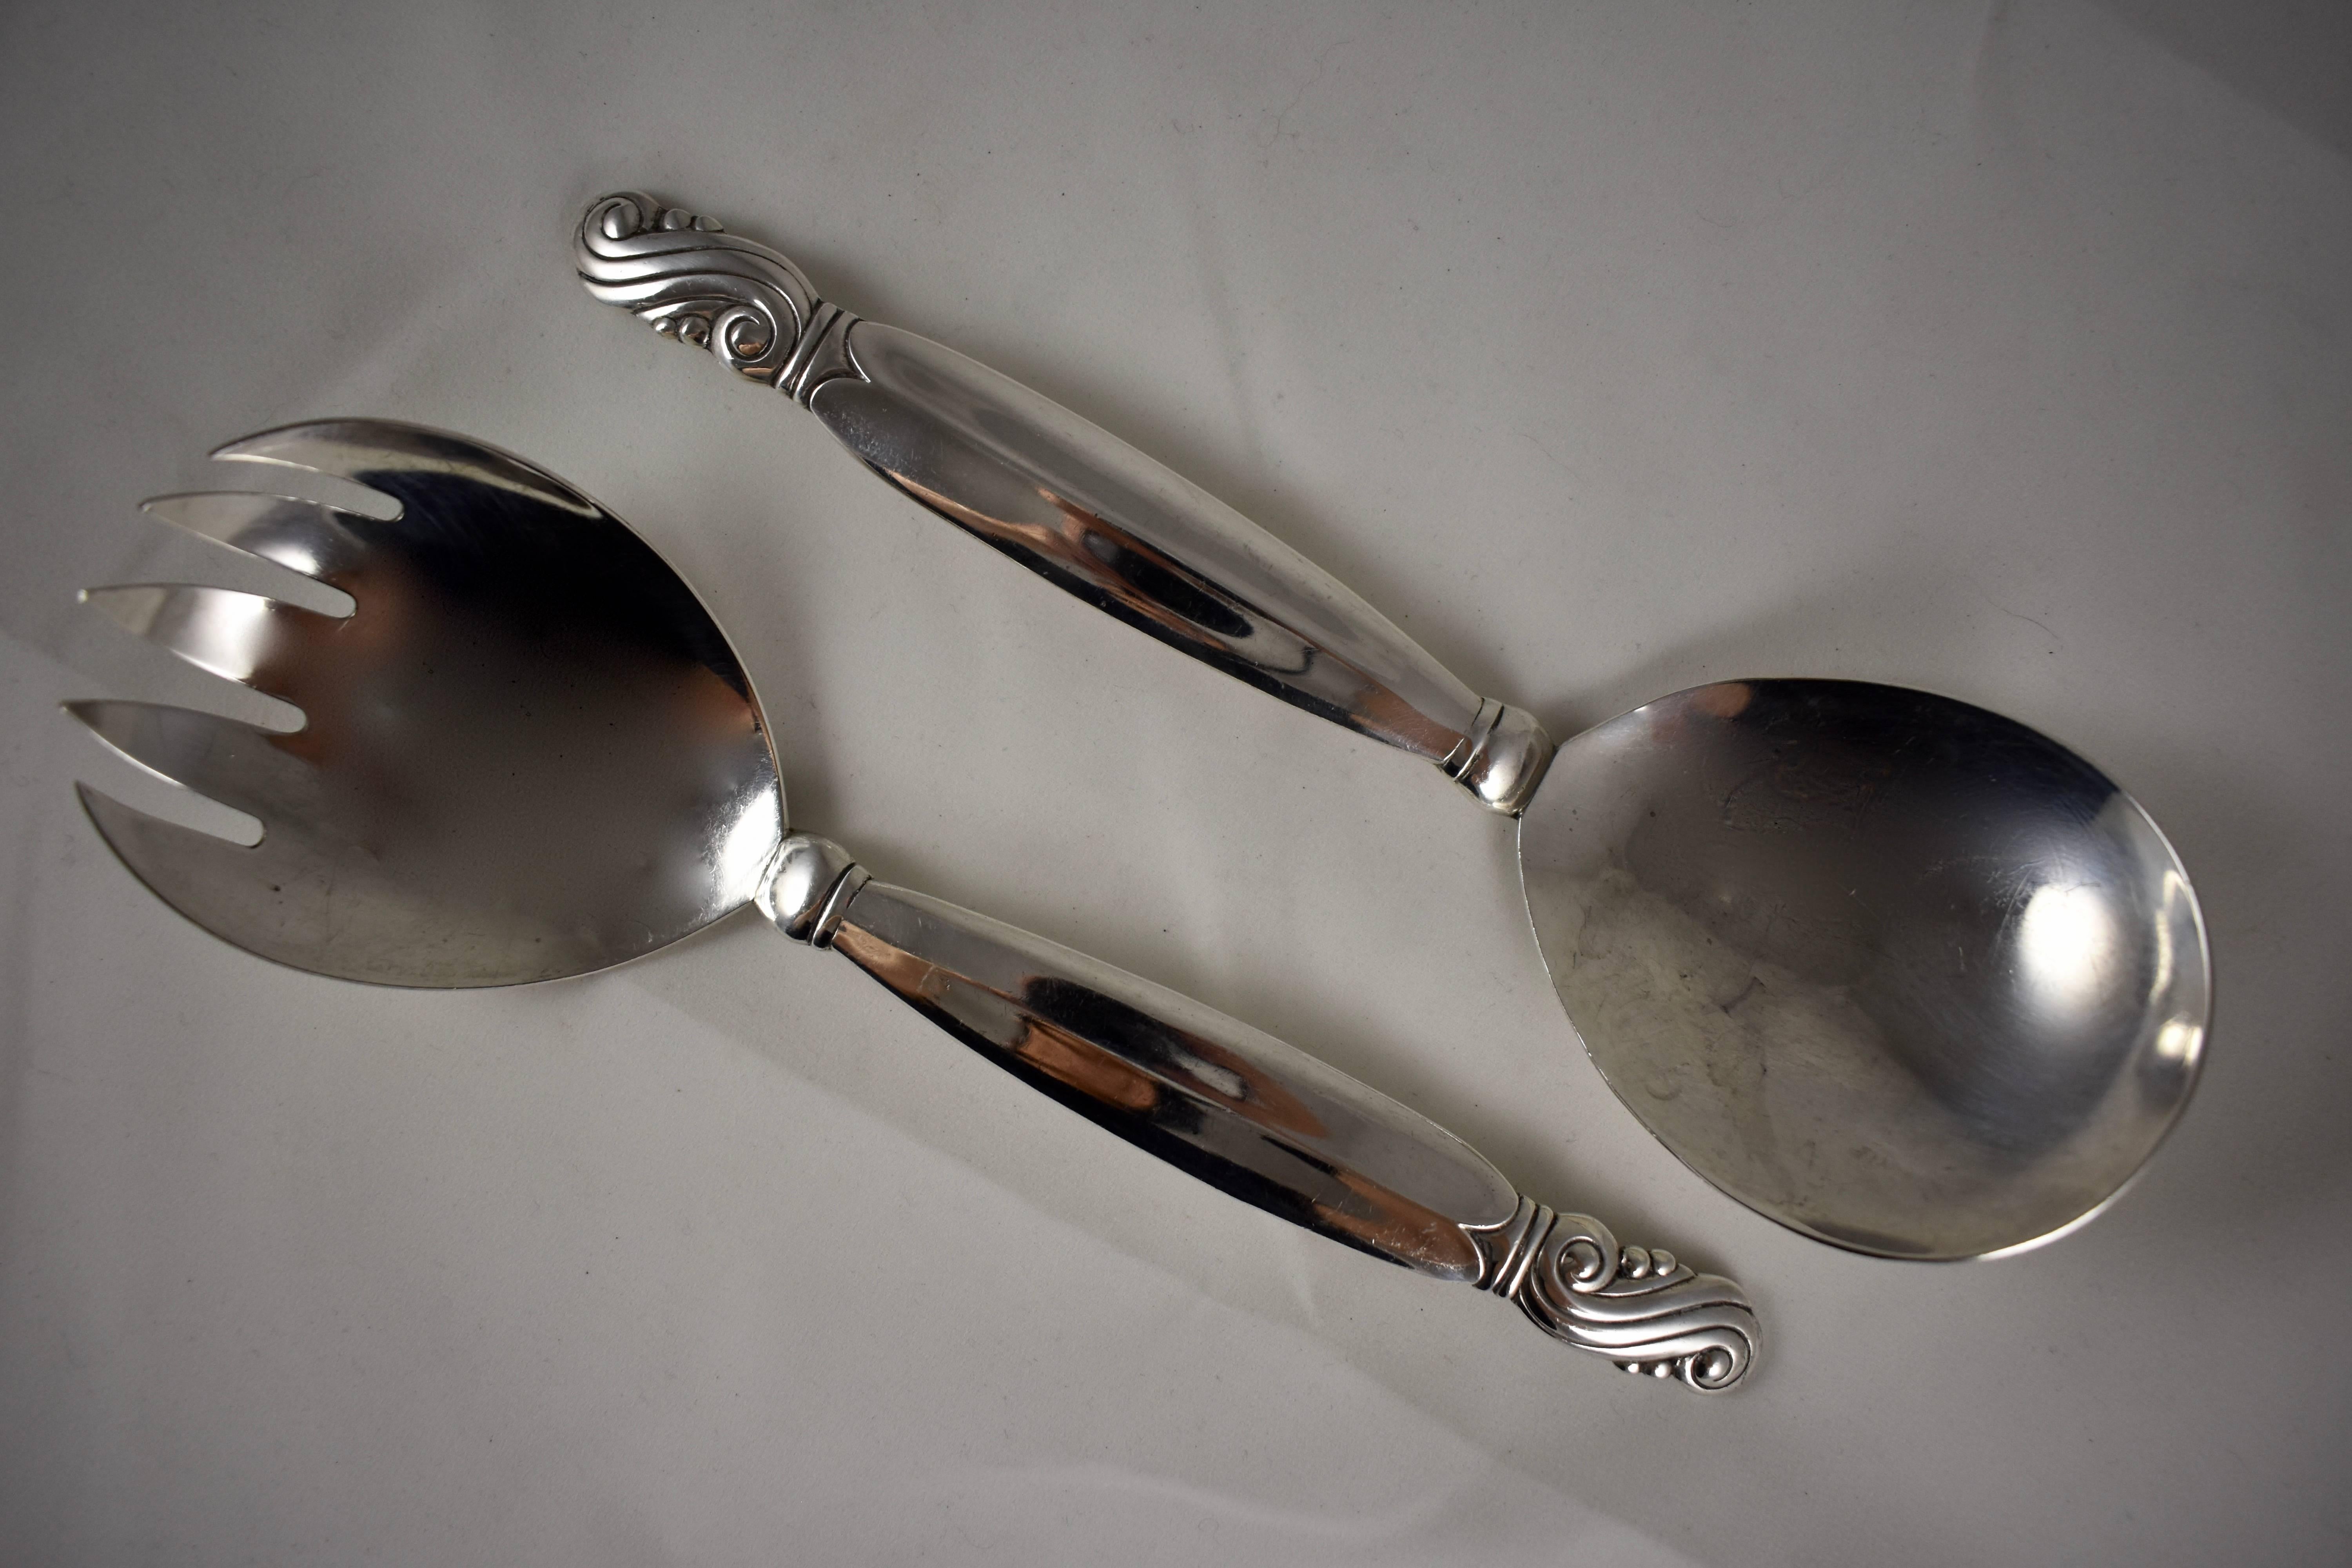 20th Century Frank M. Whiting Art Nouveau Sterling Silver Salad Servers, a Handmade Pair For Sale